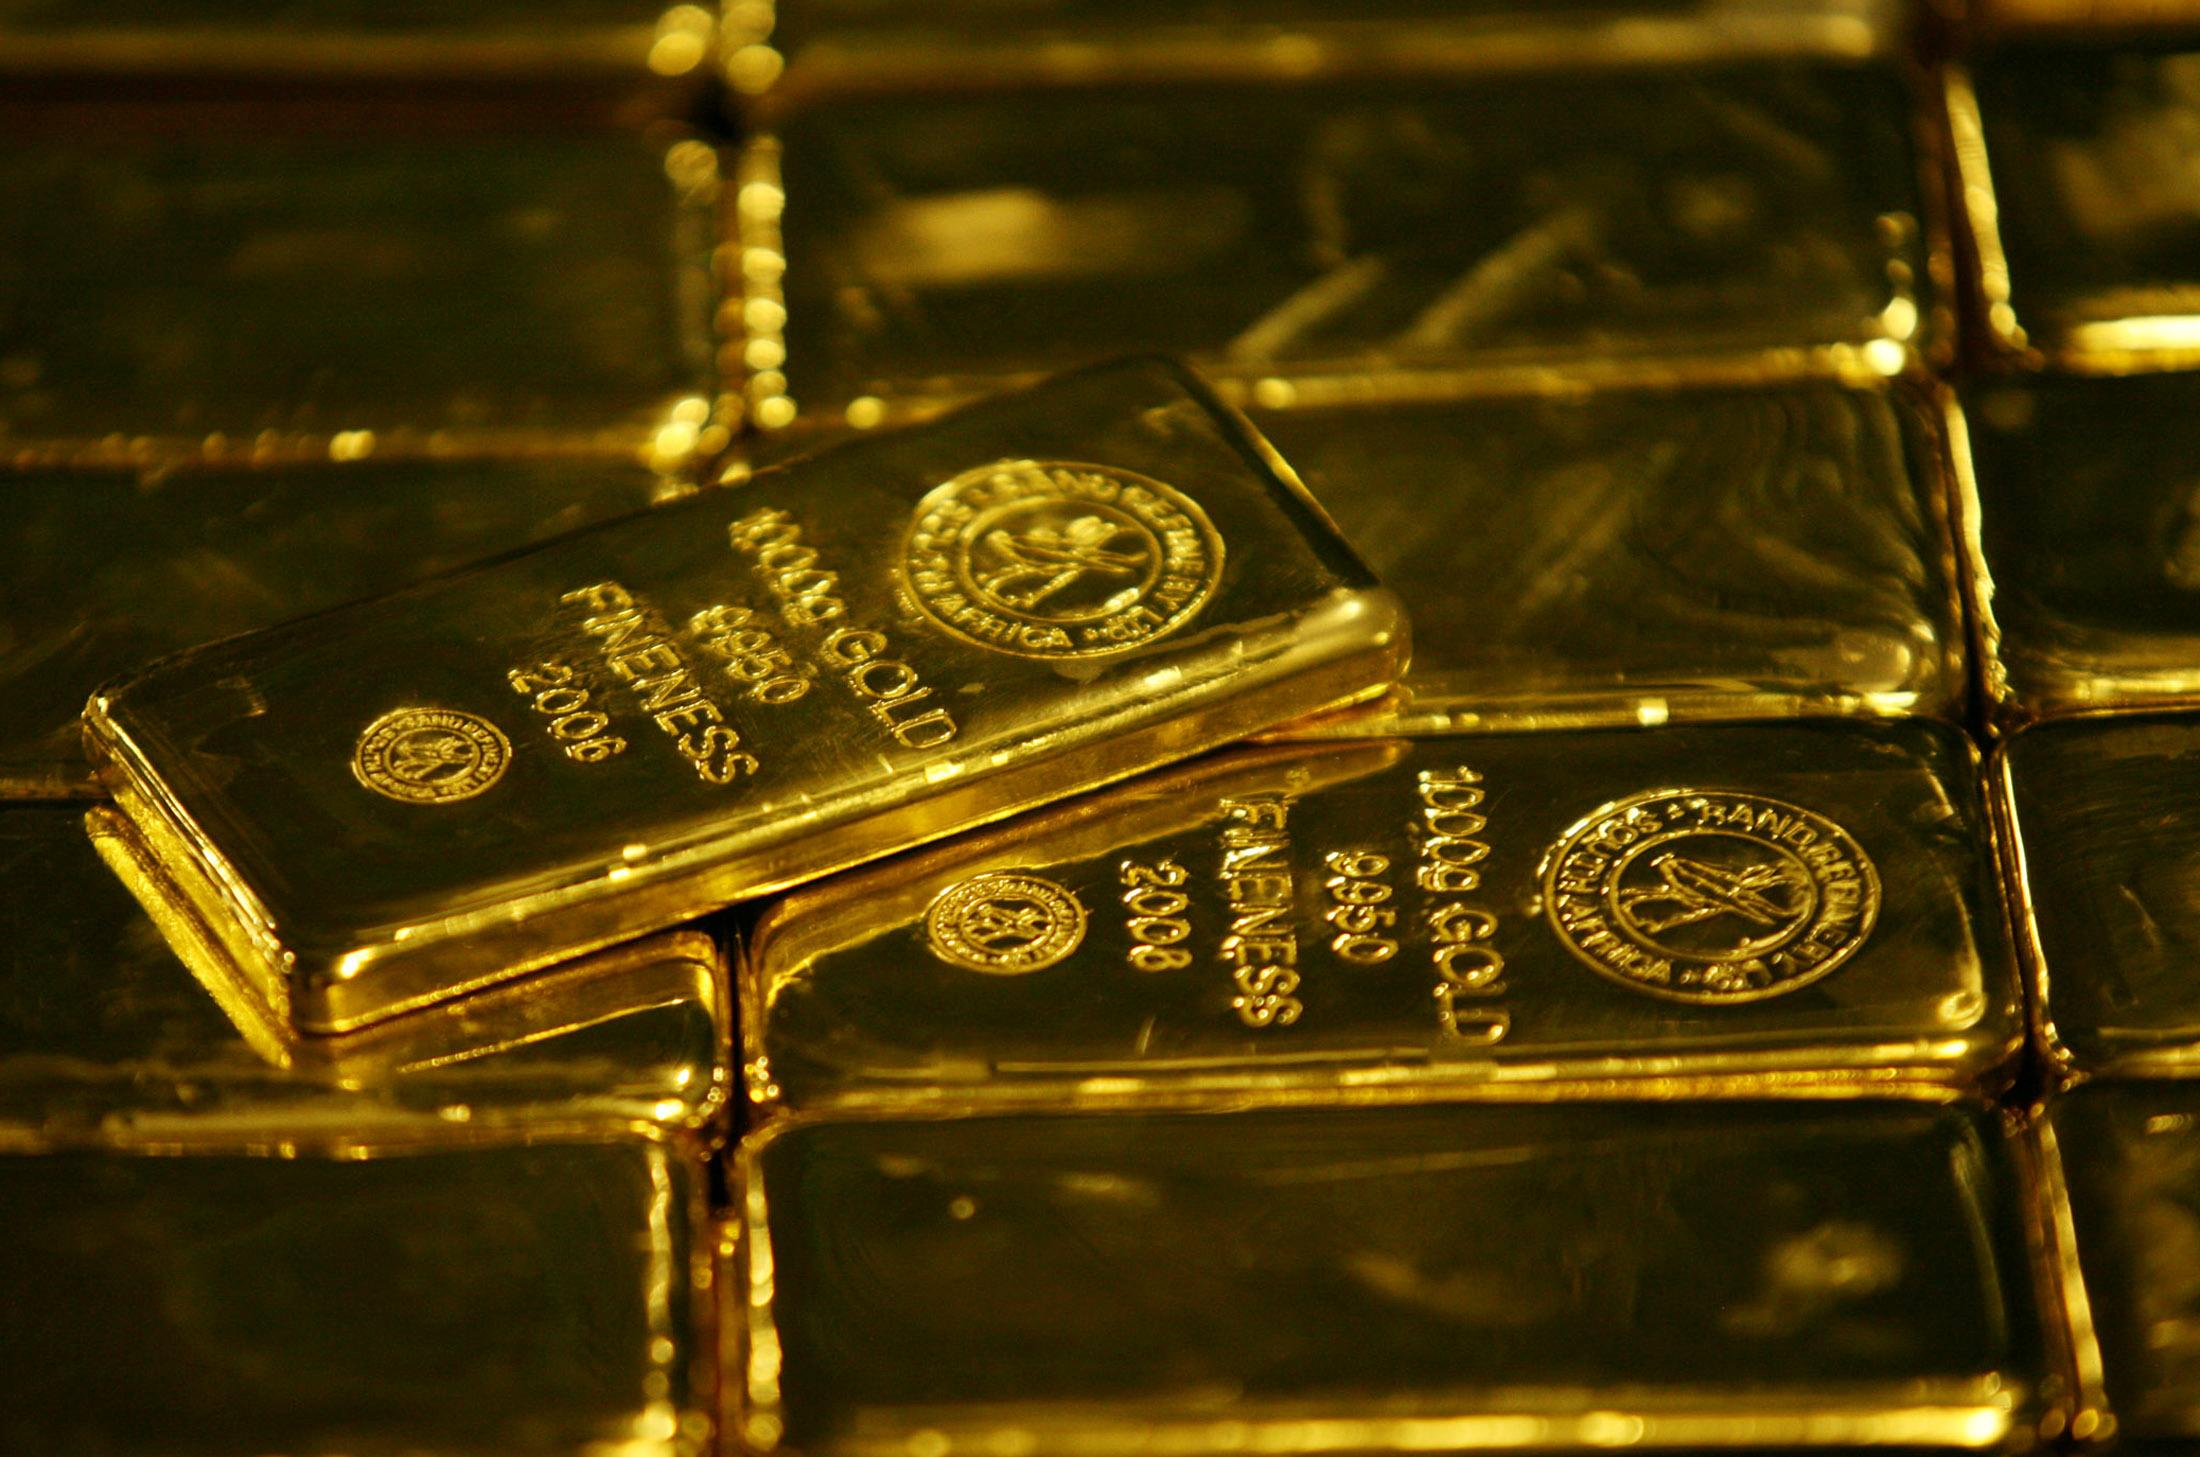 Gold bars are displayed at South Africa's Rand Refinery in Germiston. Reuters